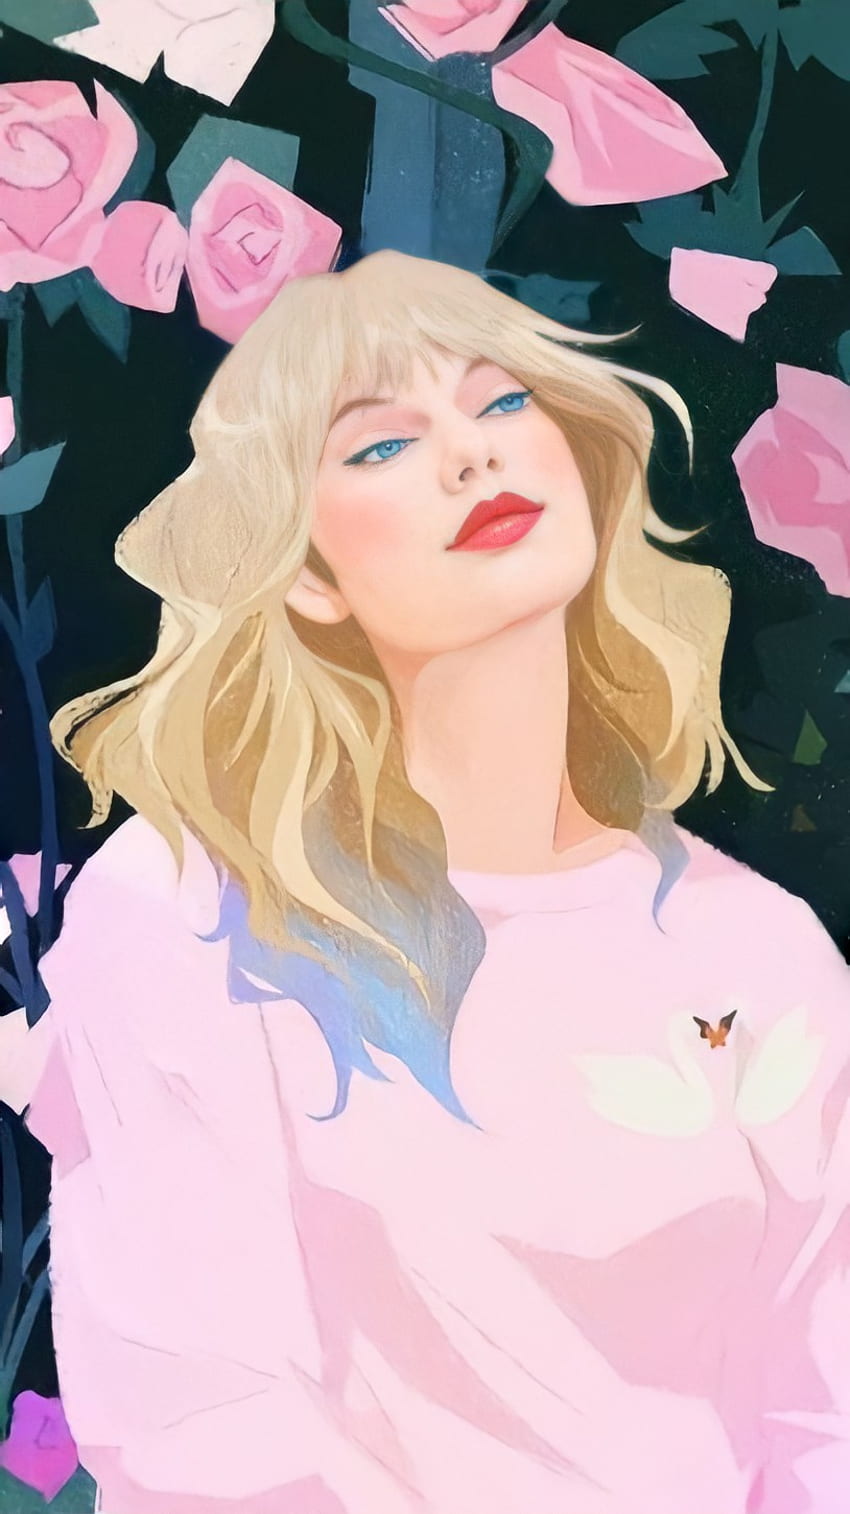 1920x1080px, 1080P Free download Taylor Swift, Drawing, Lover, Fan